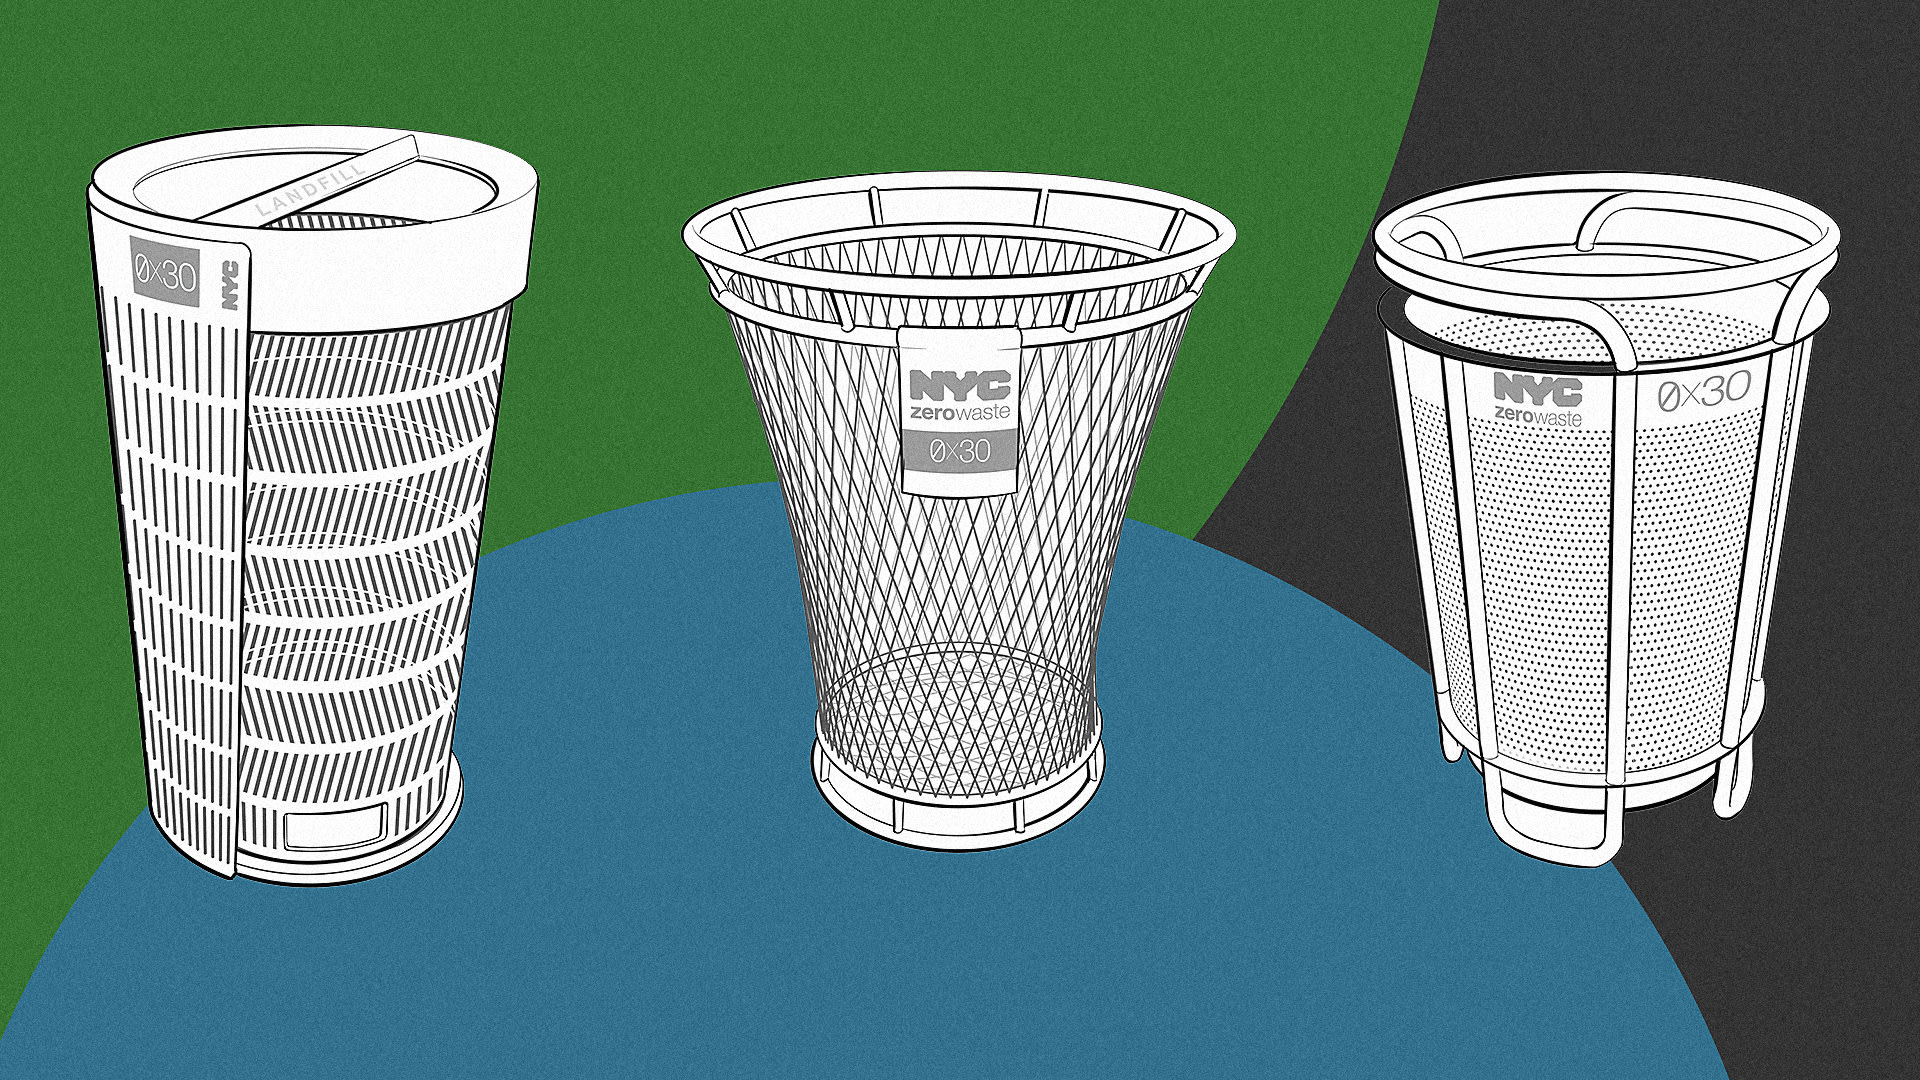 These 3 trash can designs are competing to take over the streets of NYC